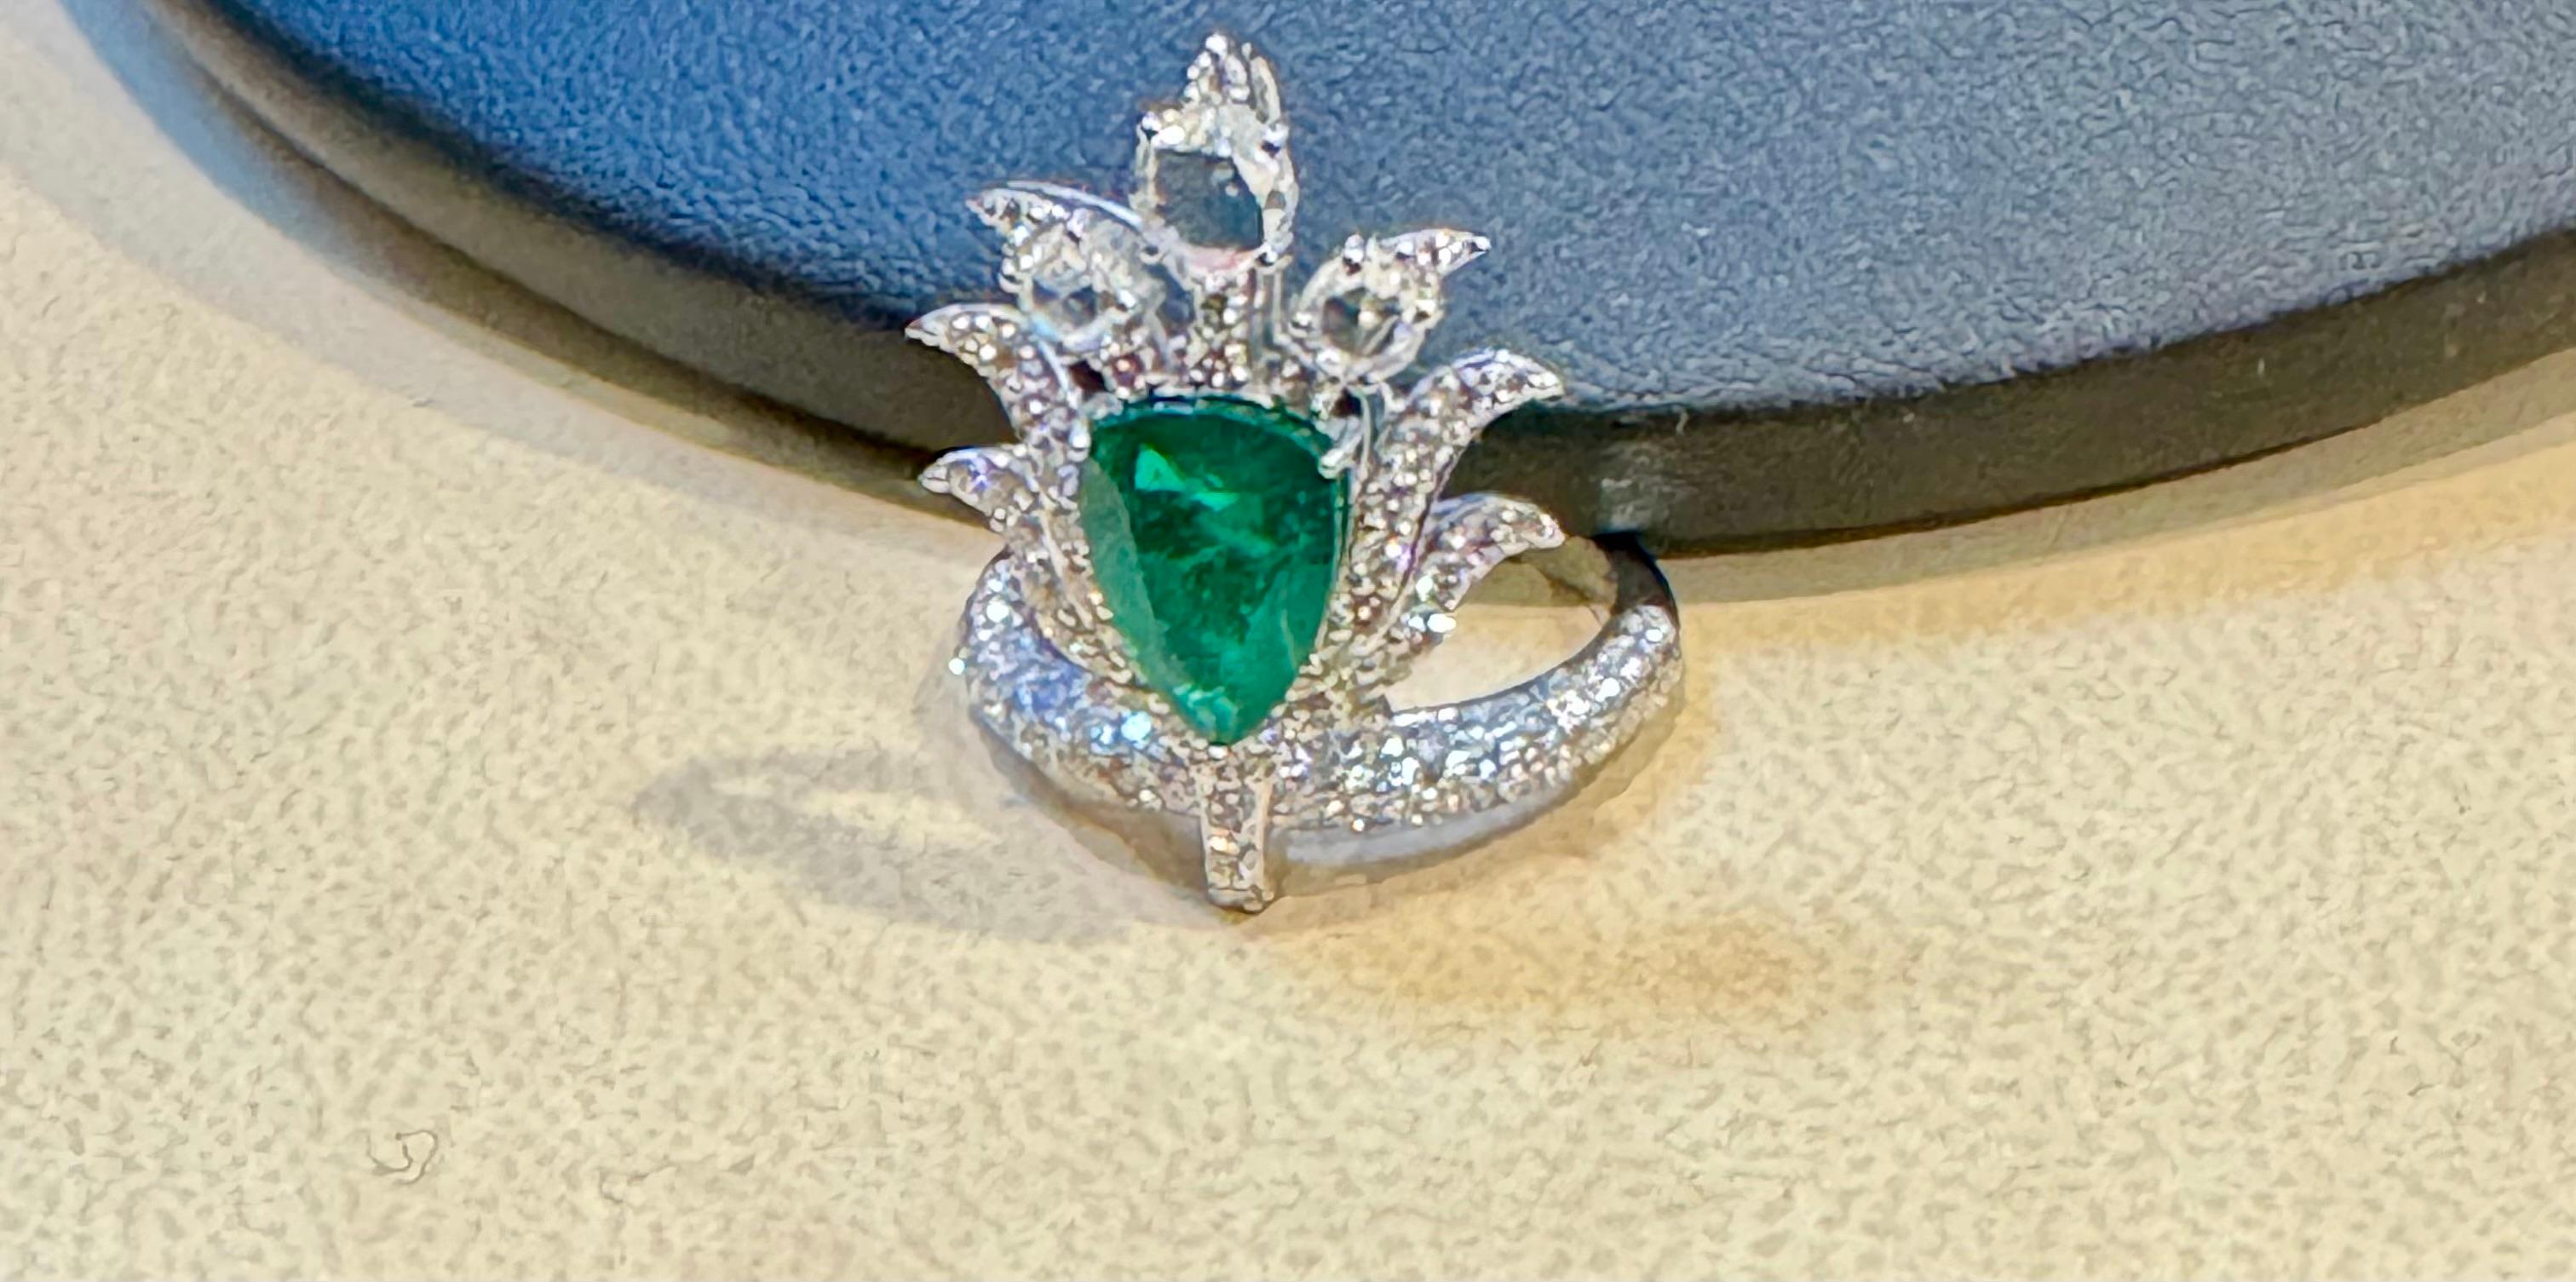 2 Ct Finest Zambian Pear Emerald & 2 Ct Diamond Ring in 18 Kt Gold Size 7 For Sale 1